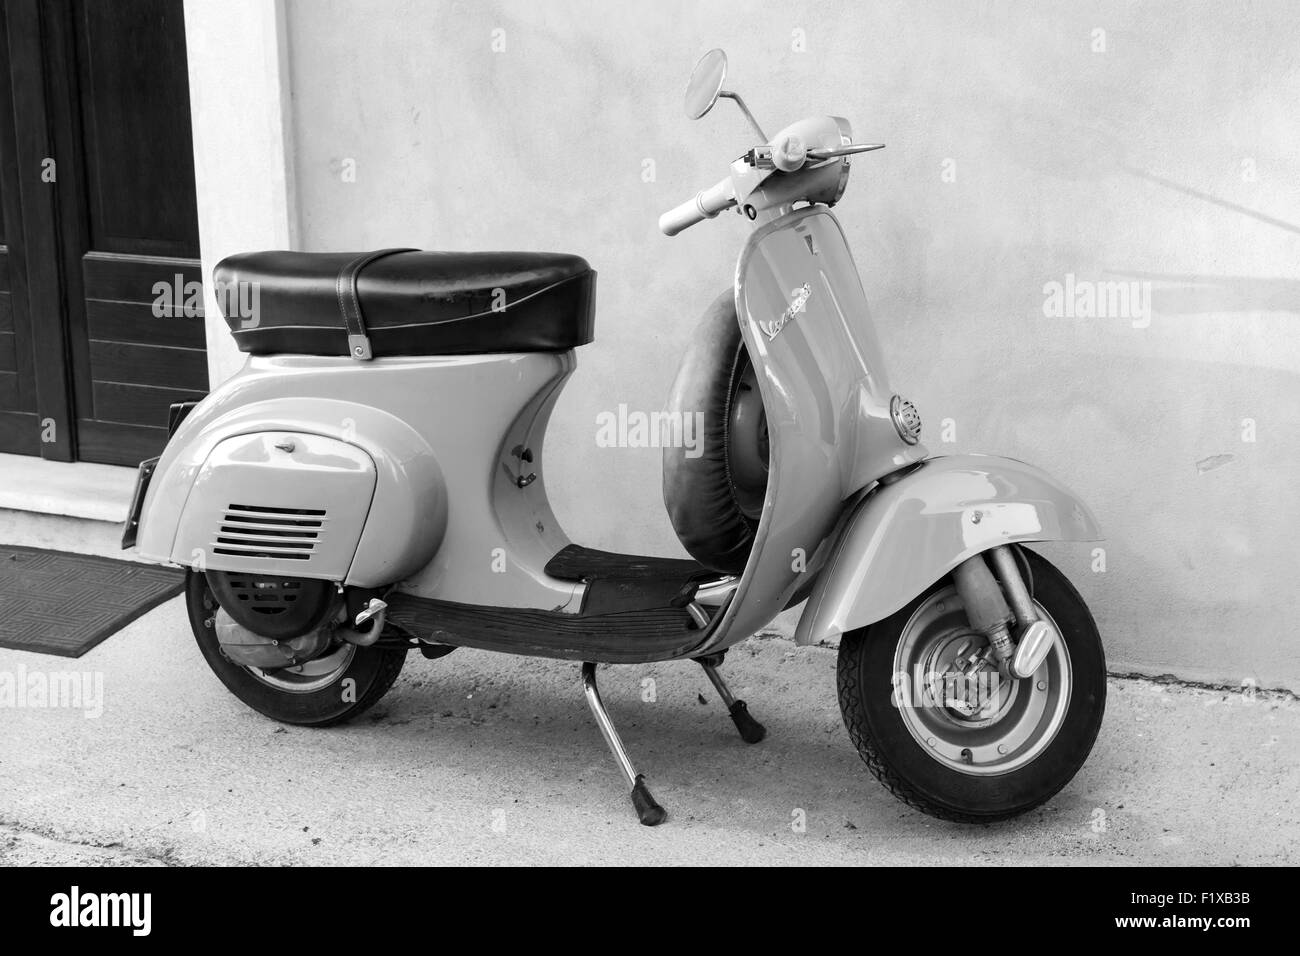 Gaeta, Italy - August 19, 2015: Classical Vespa scooter stands parked near the wall Stock Photo